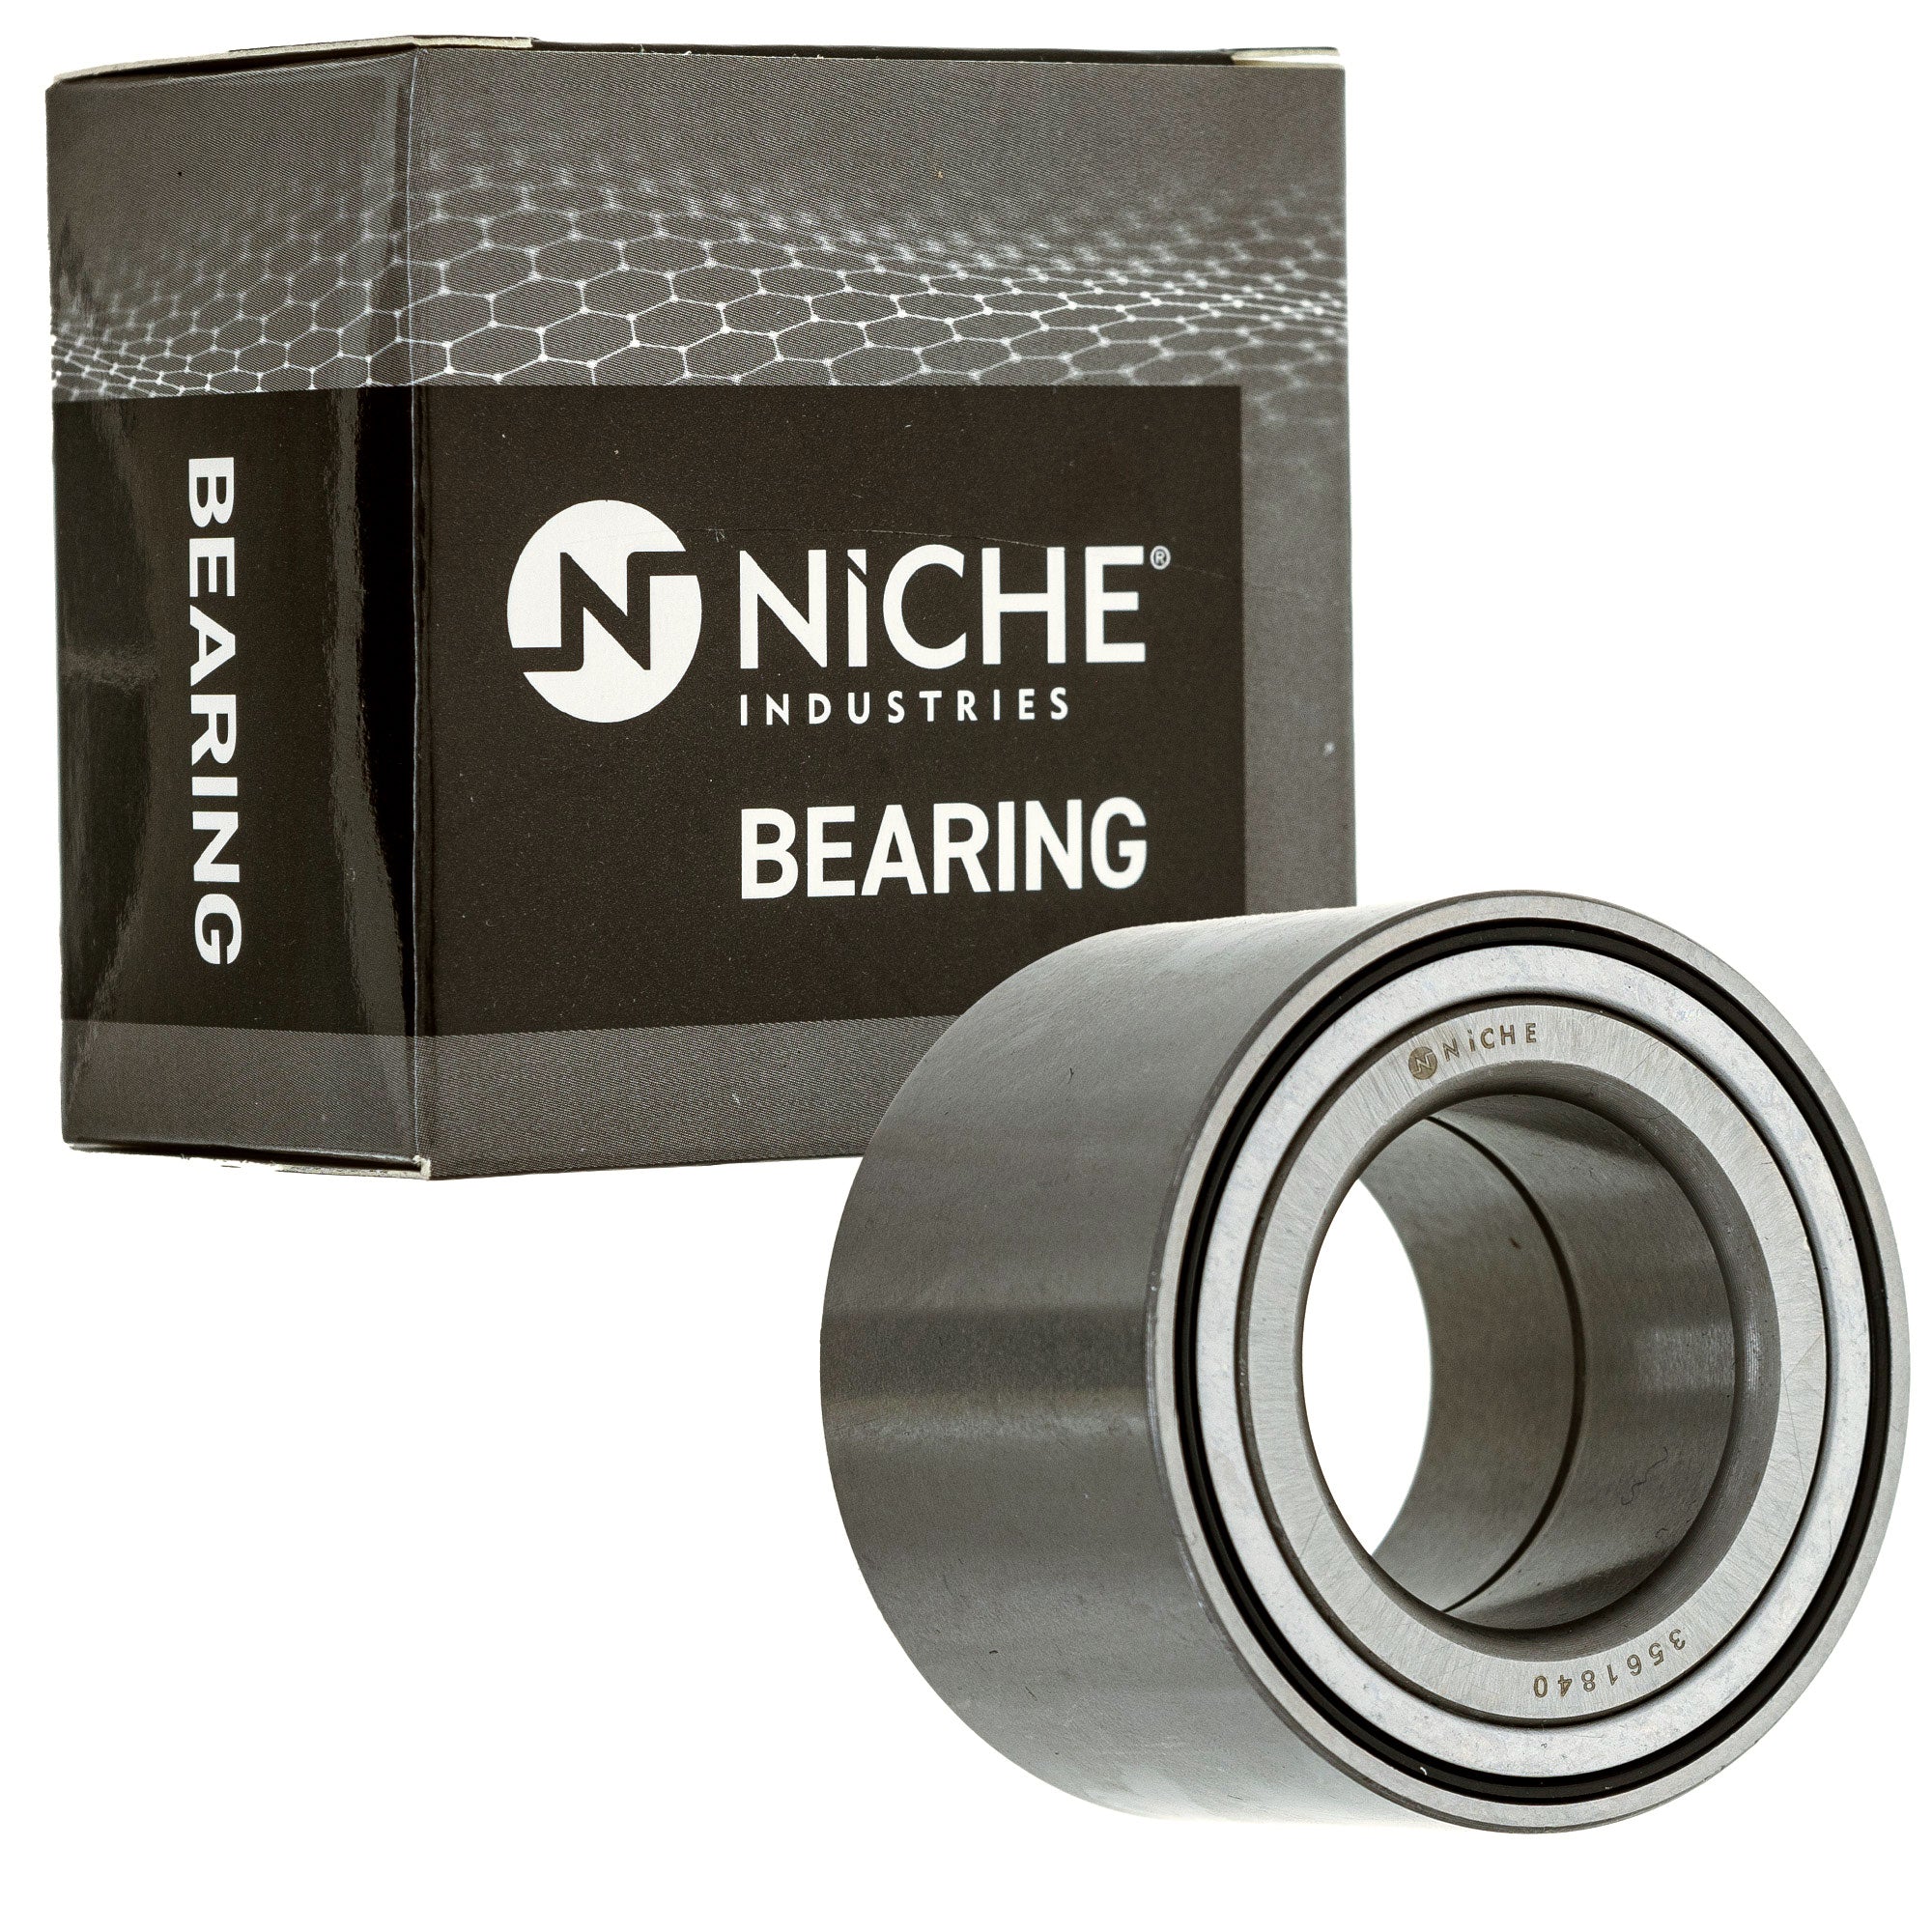 NICHE 519-CBB2216R Bearing 2-Pack for zOTHER King Concours